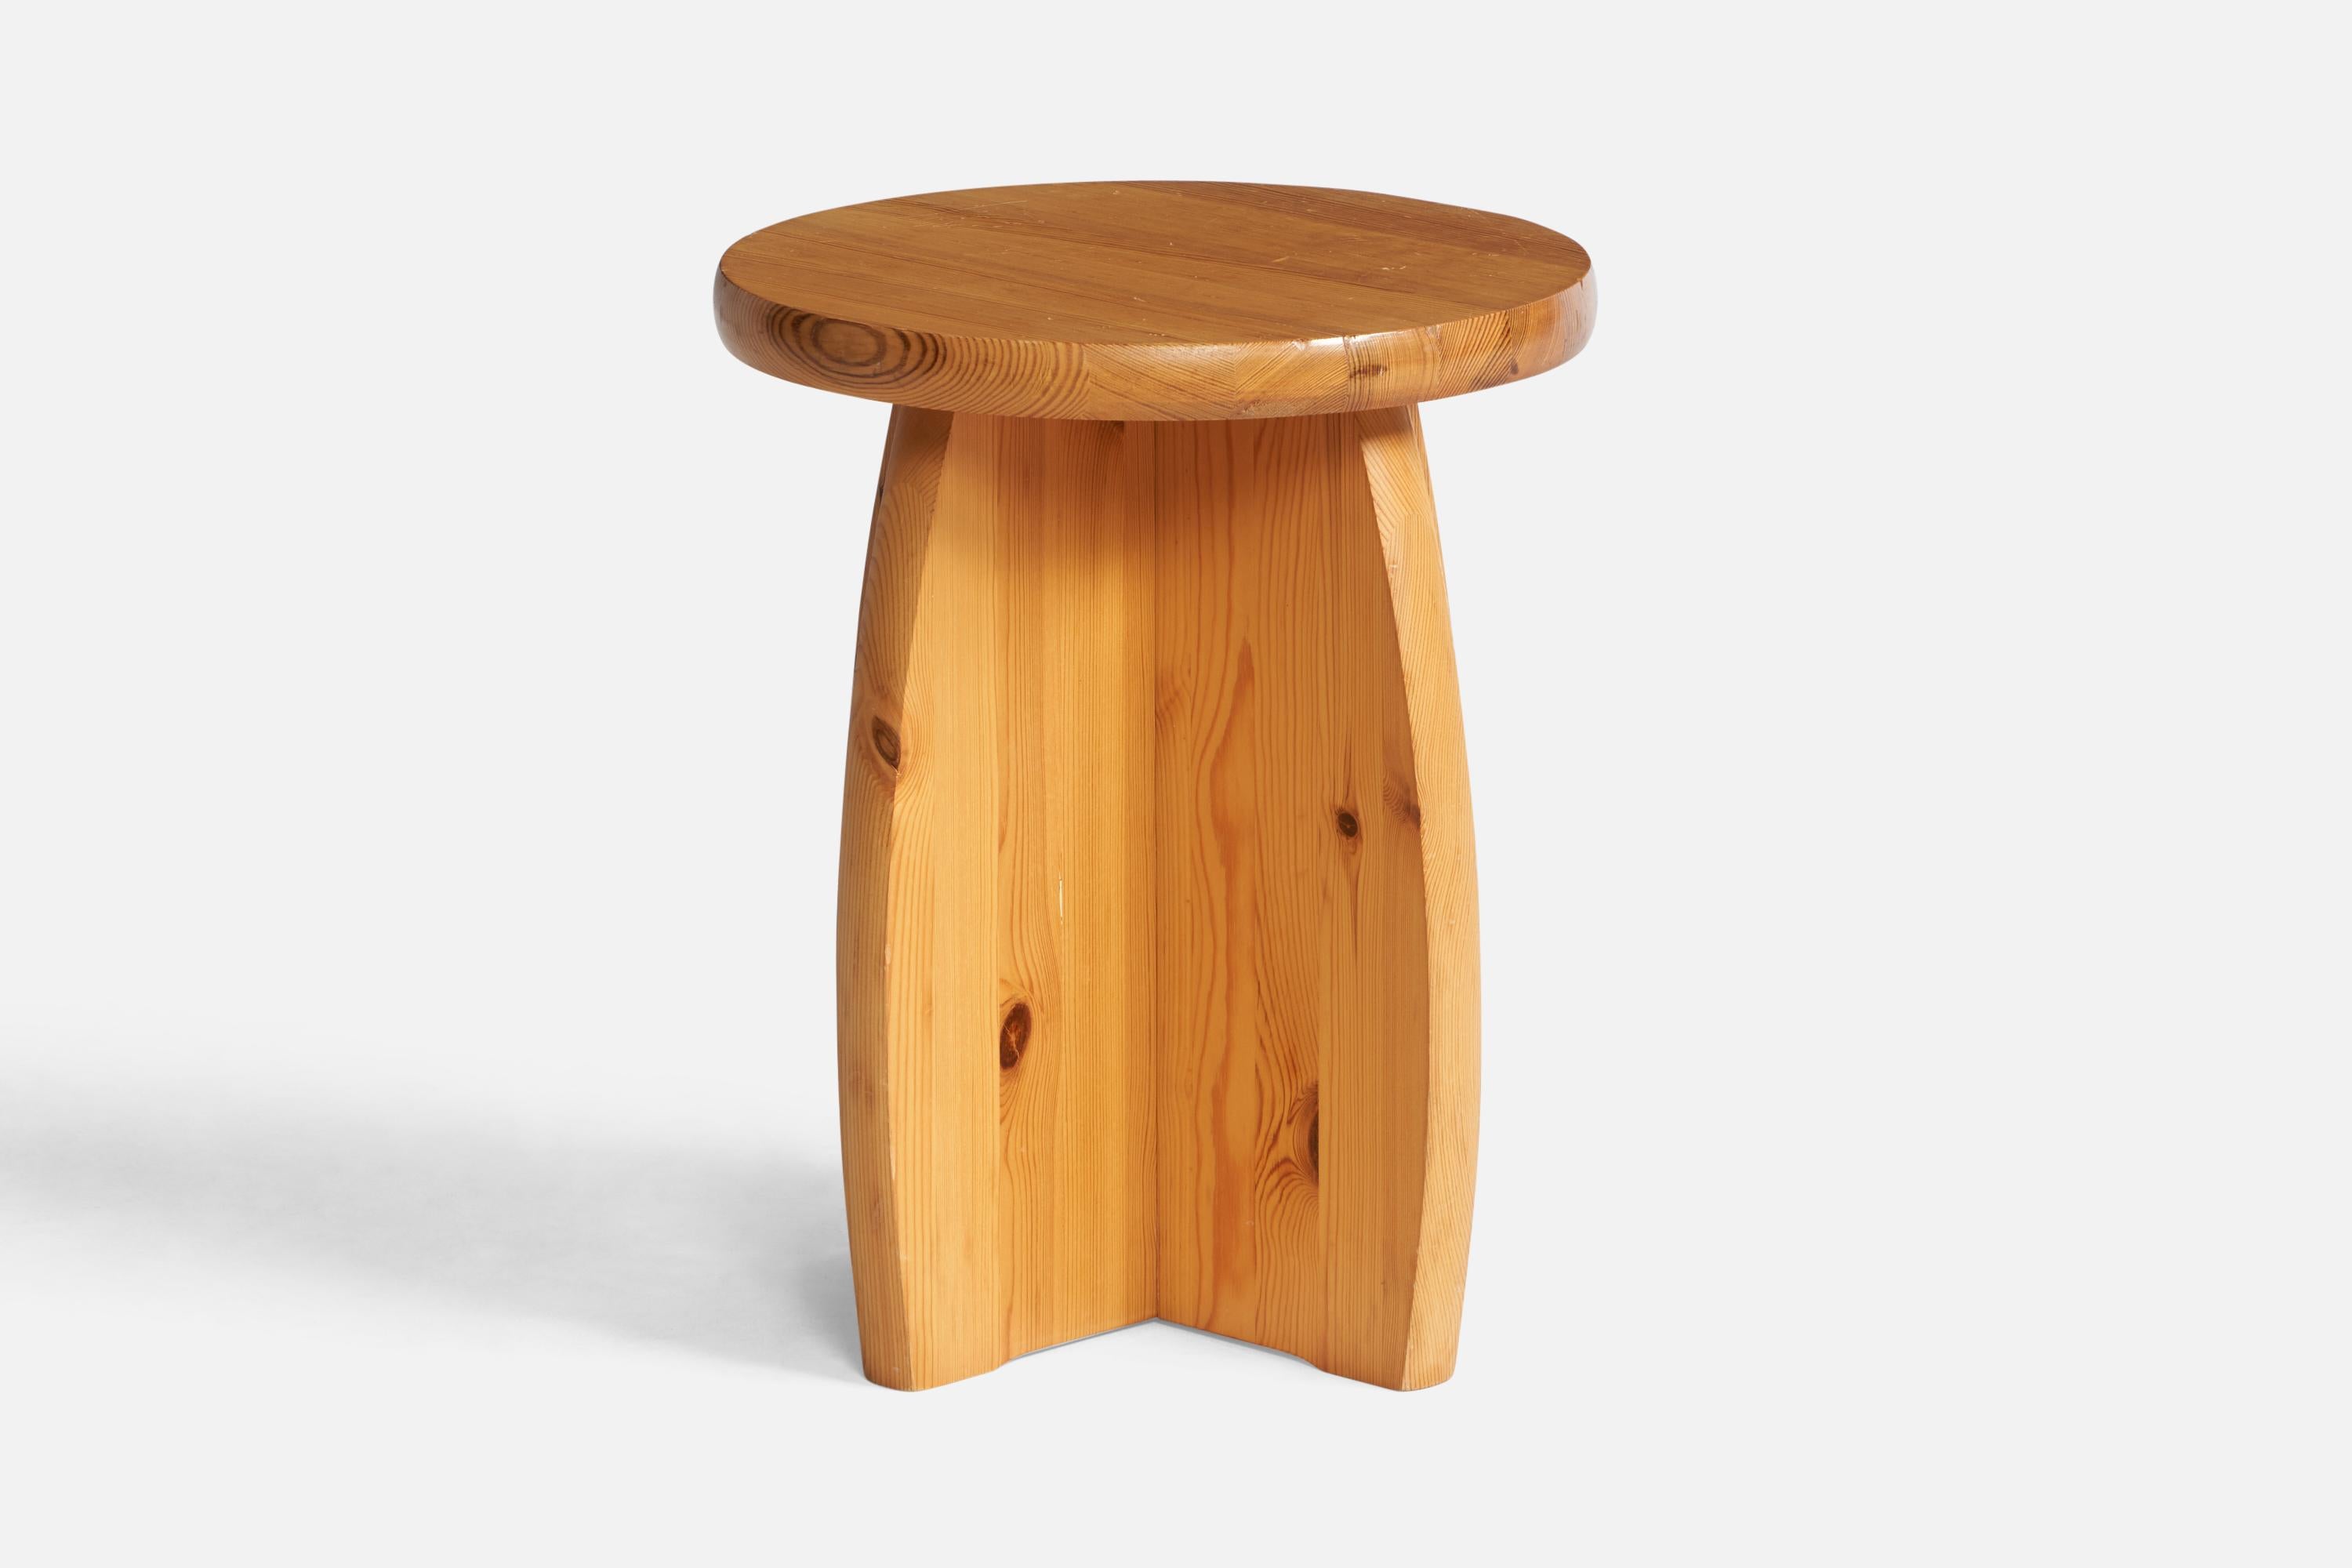 A pine stool designed and produced in Sweden, 1970s.

Seat height: 16.85”